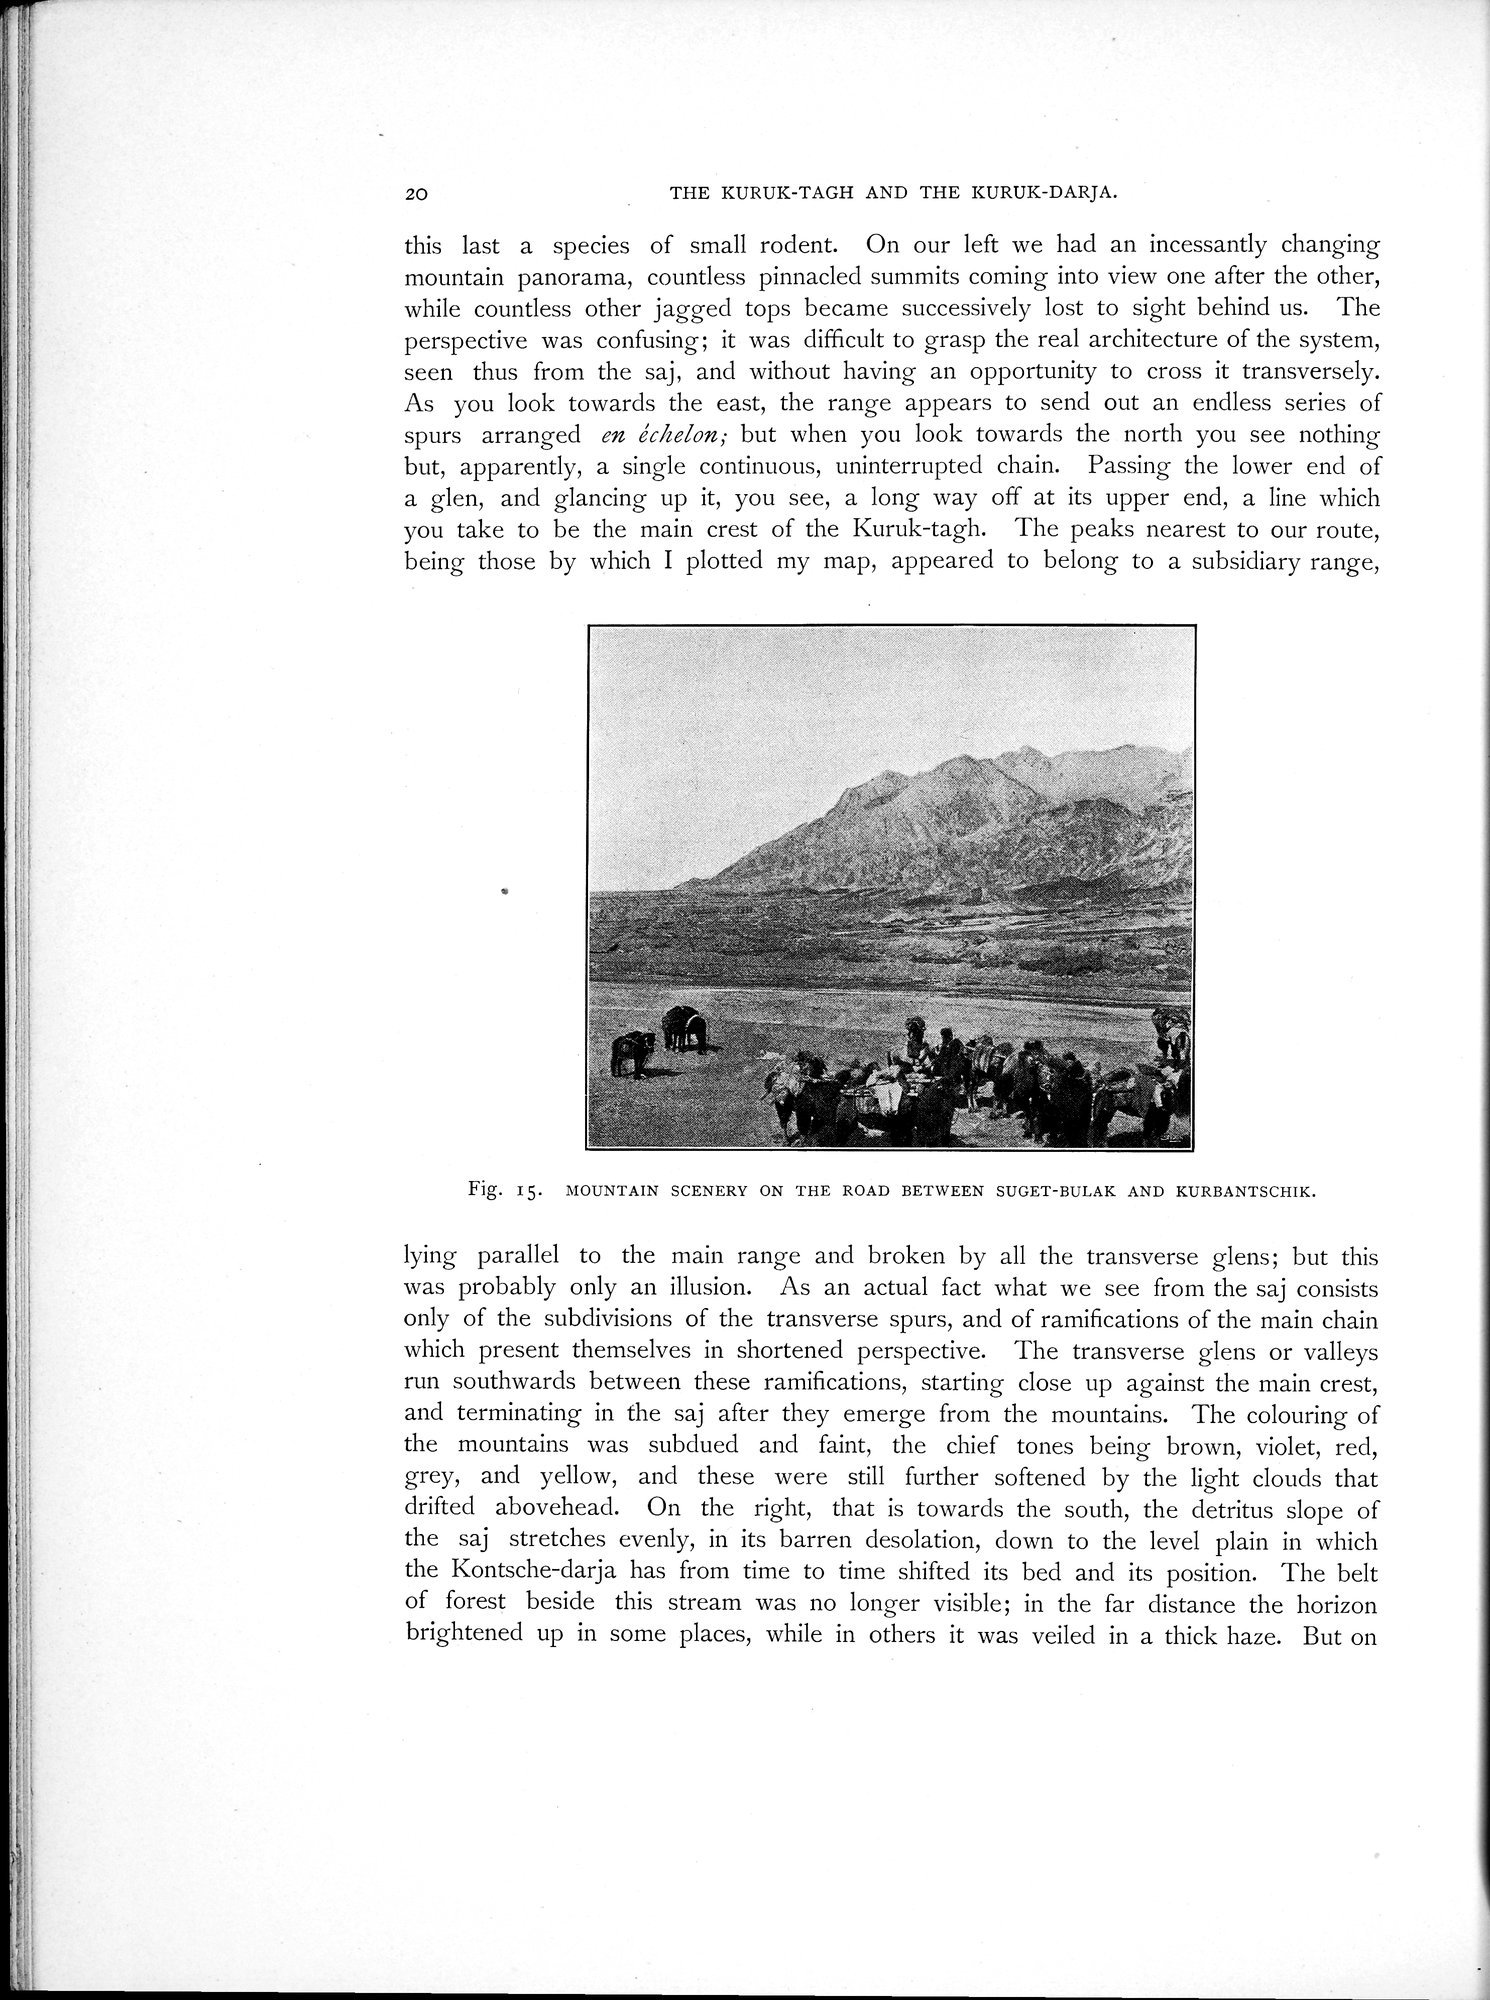 Scientific Results of a Journey in Central Asia, 1899-1902 : vol.2 / 32 ページ（白黒高解像度画像）